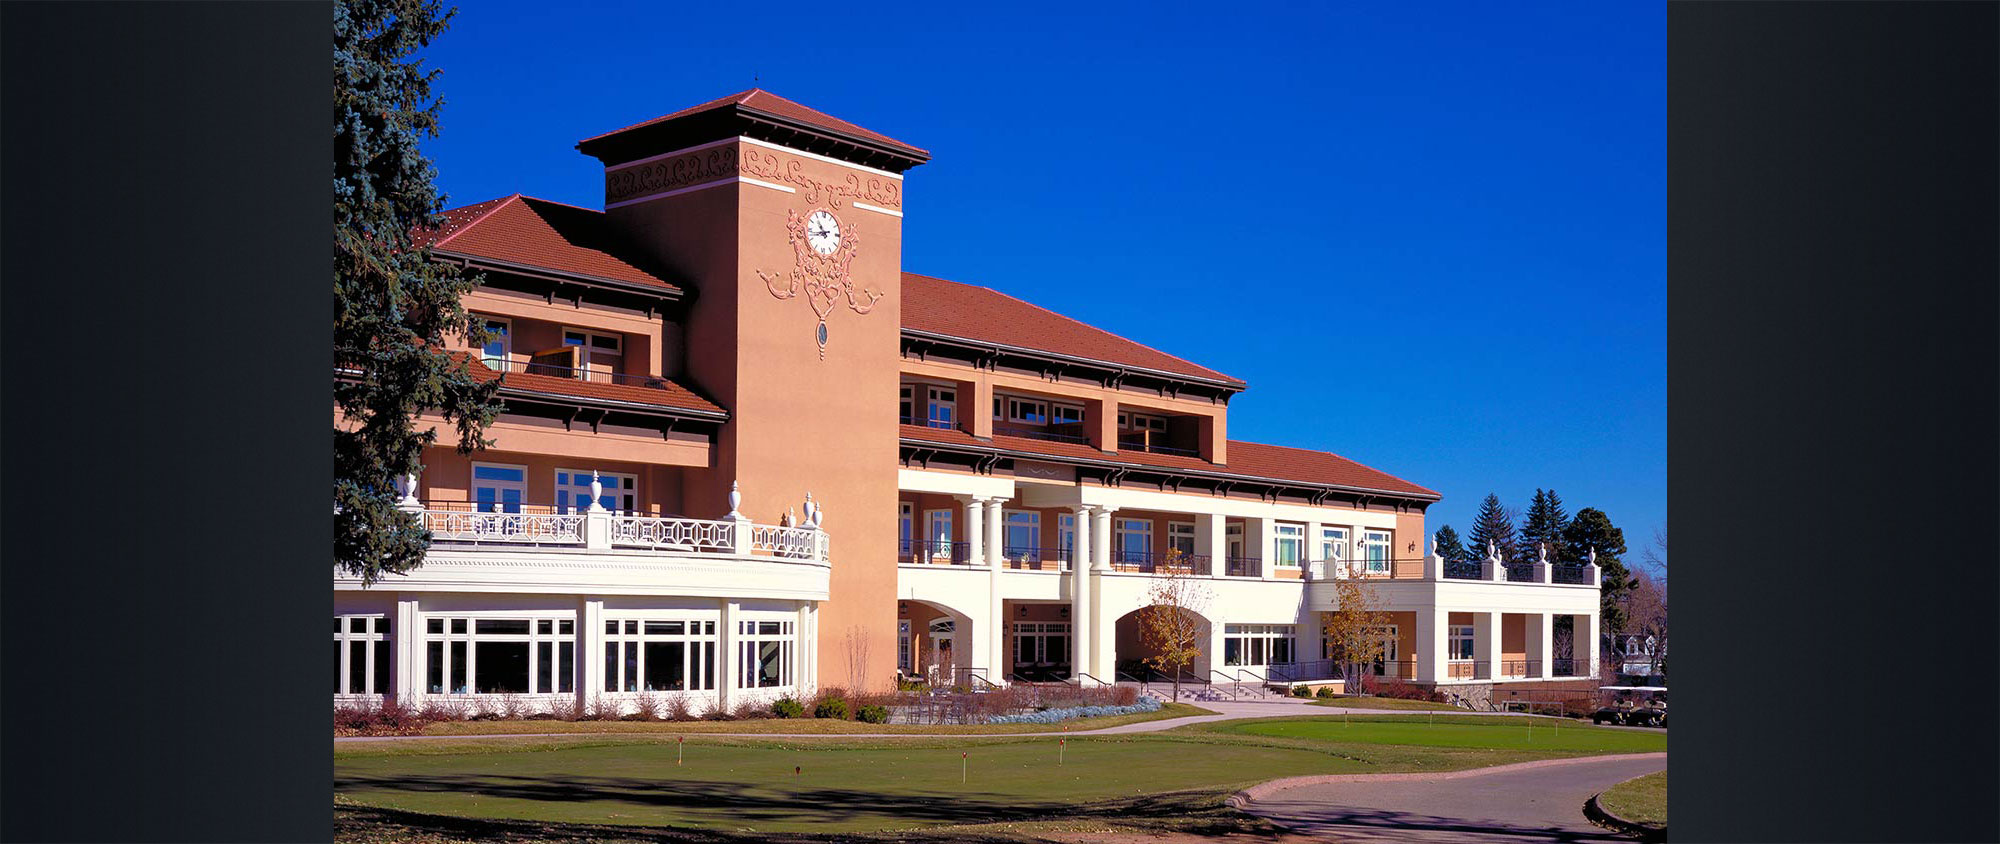 The Broadmoor Spa and Golf Clubhouse